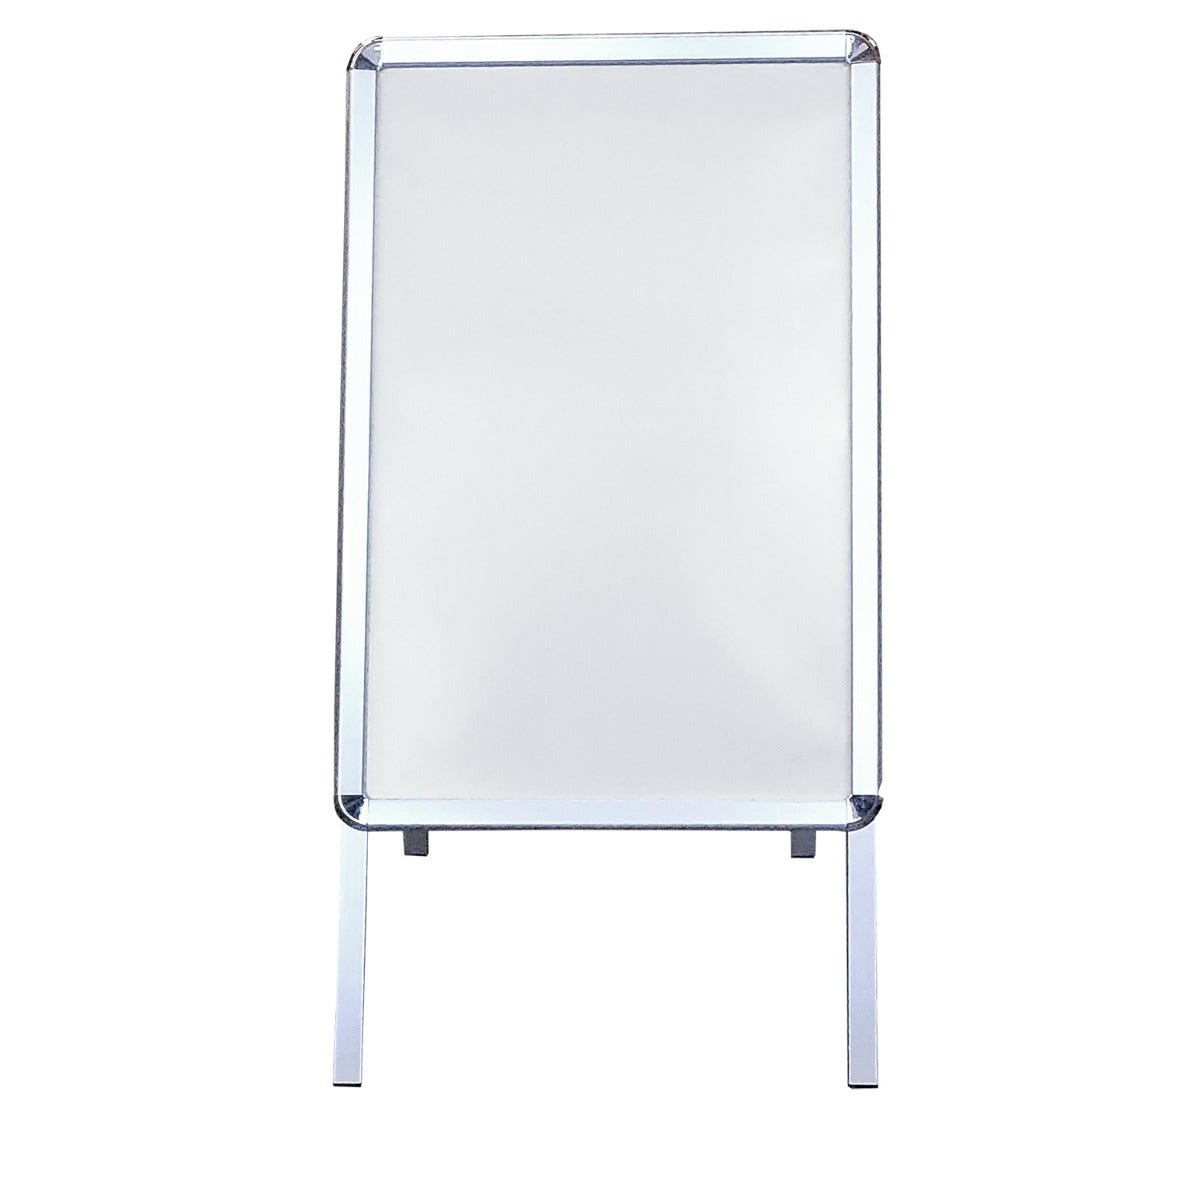 A-Frame Aluminum Whiteboard and Sign Holder - Eddie's Hang-Up Display Ltd.